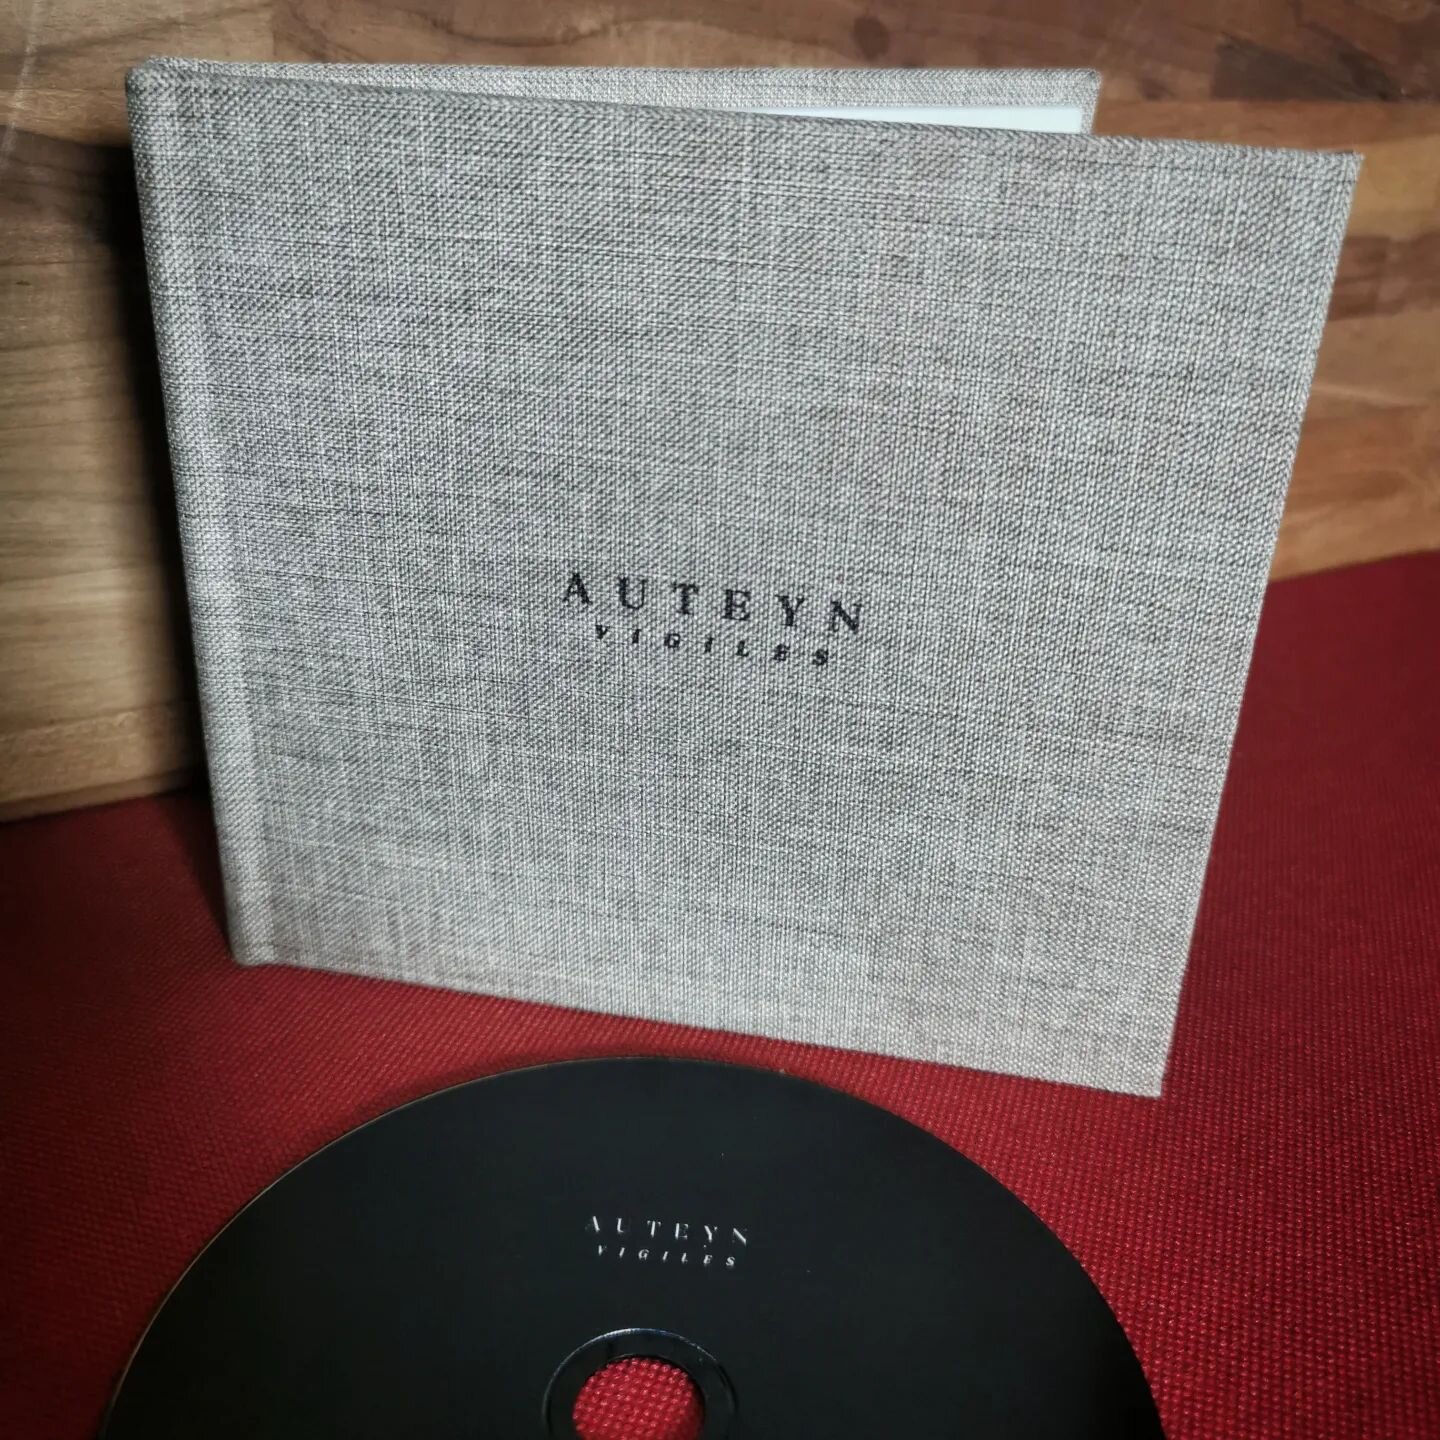 One day left before release!

The CDs of Vigiles have just arrived. I only made a few copies for everyone involved - release will be digital only but if there's a demand I'll order more CDs, vinyls &amp; cassettes. Let me know! 

.

.

.

#auteyn #ex